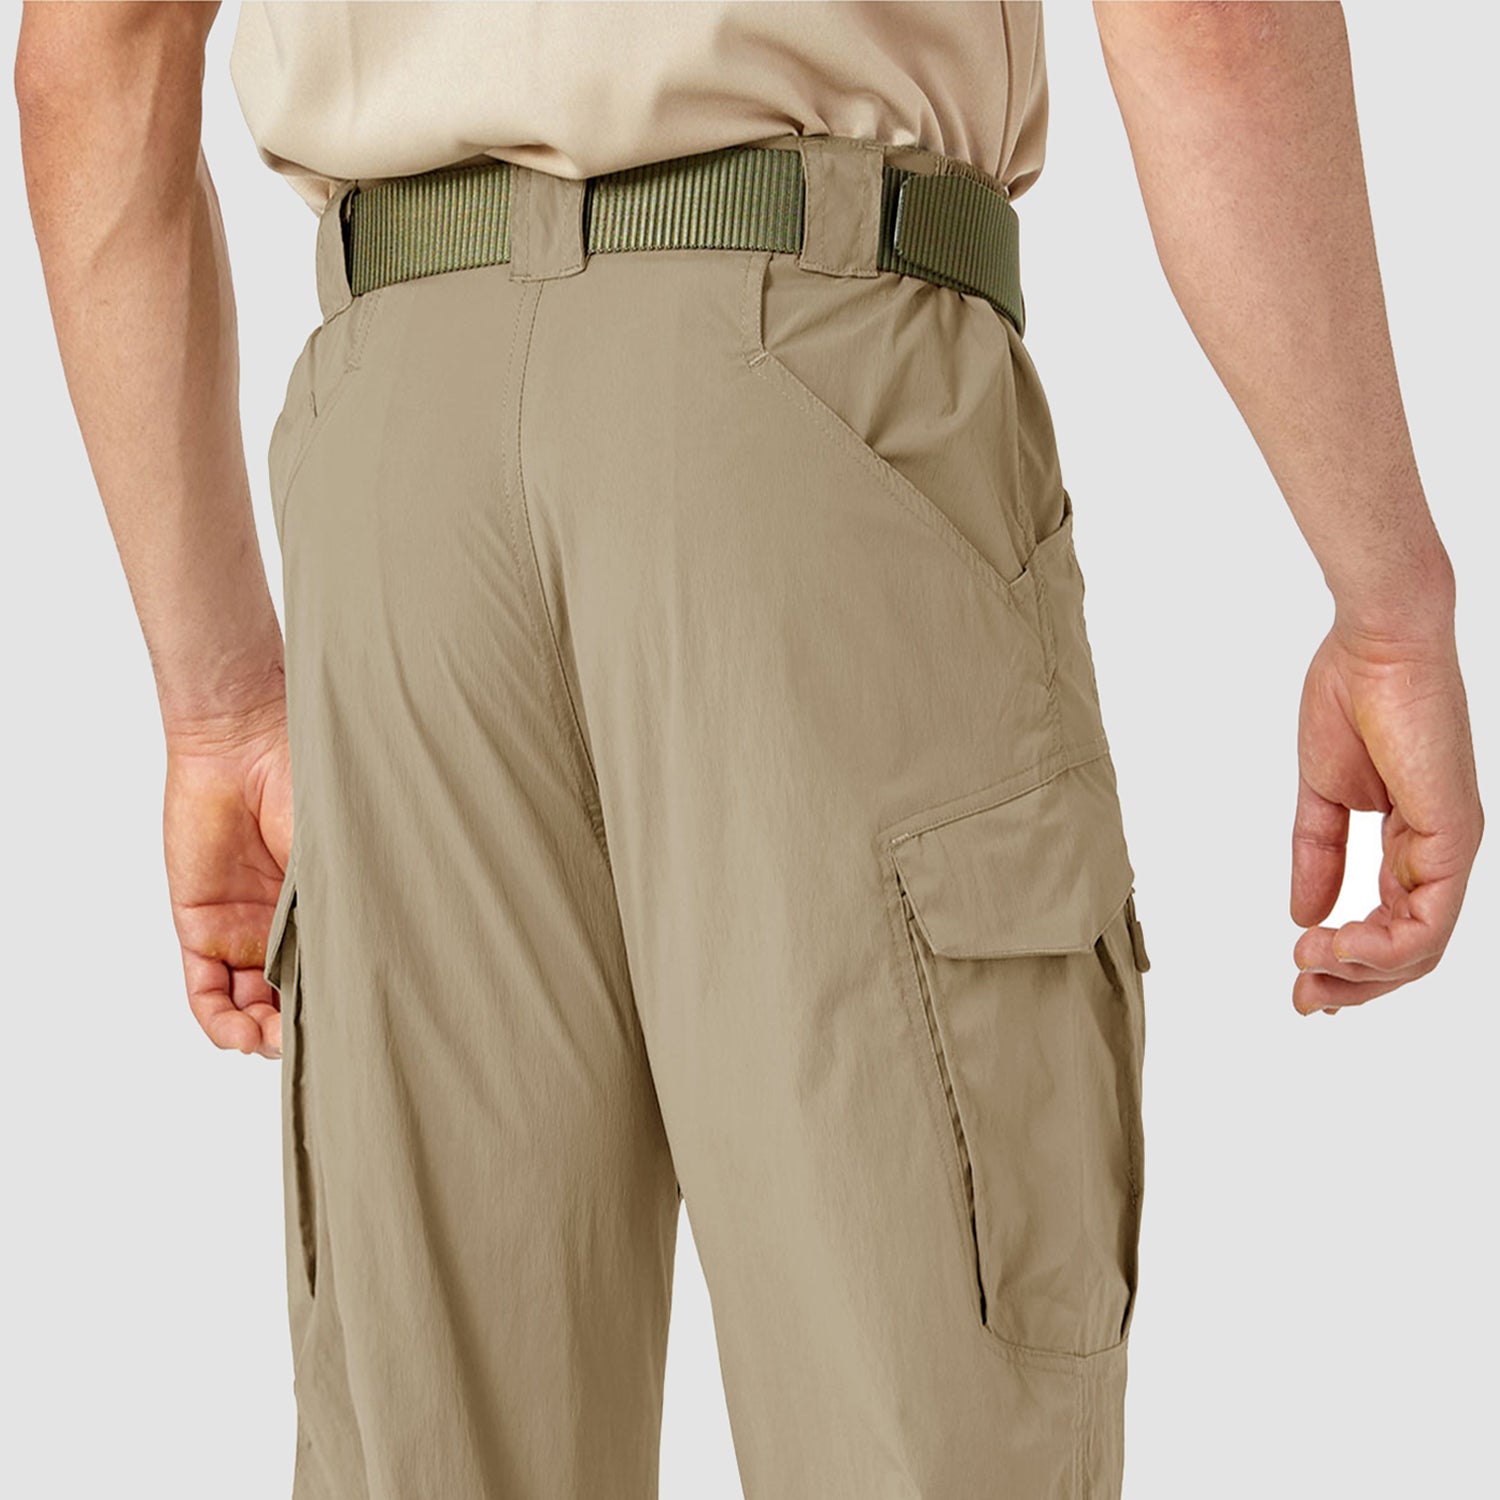 Men's Work Cargo Pants Climbing Tactical Hiking Multi-Pockets Quick-dry  Outdoor